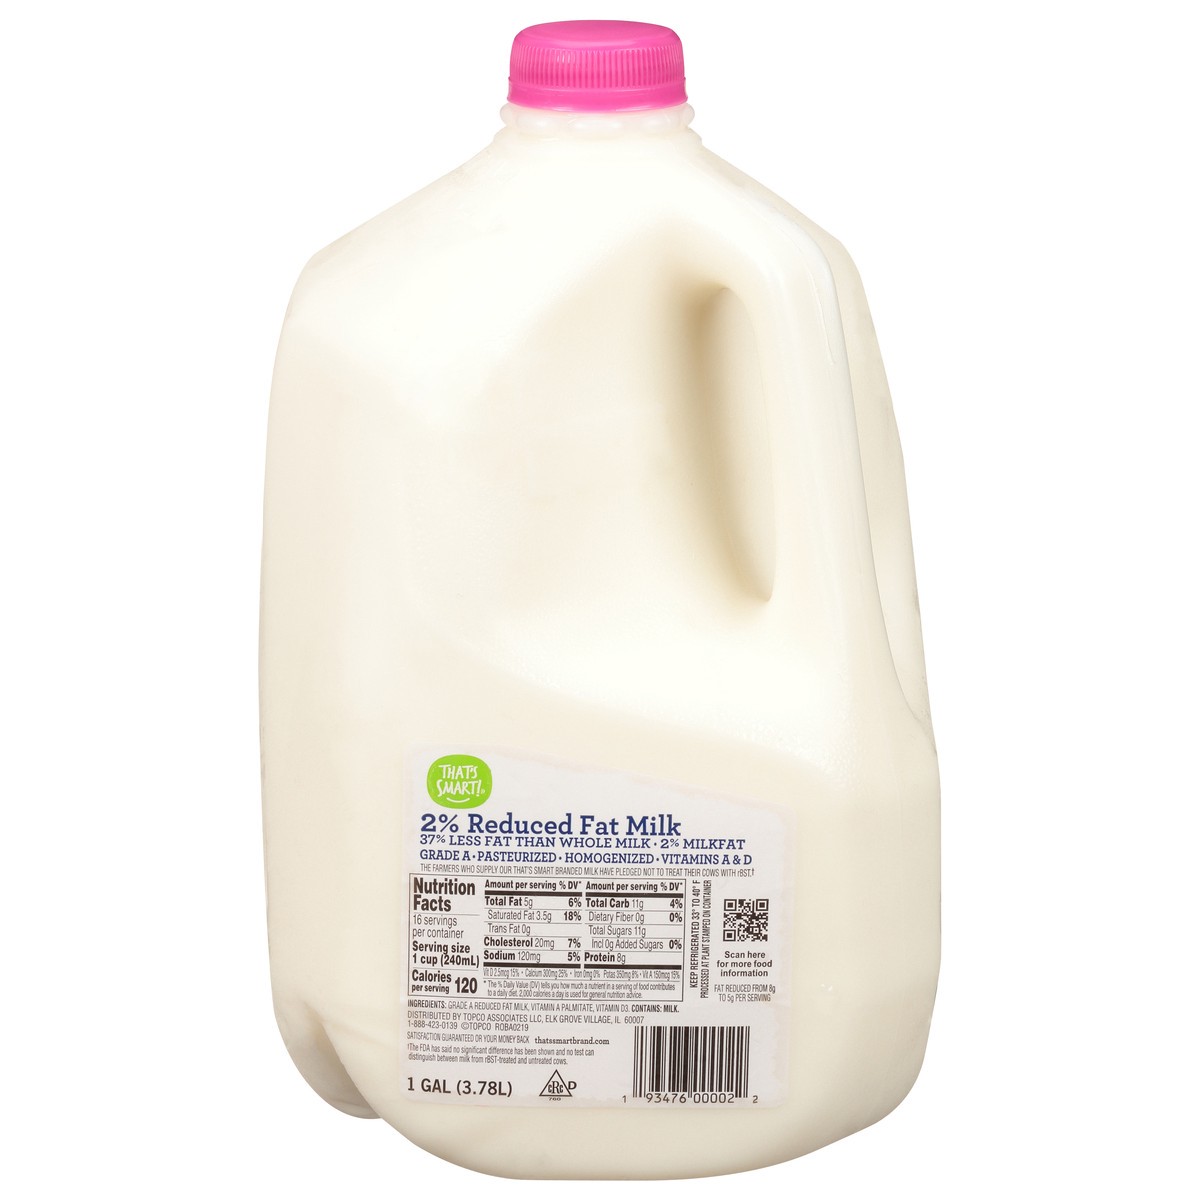 slide 1 of 11, That's Smart! 2% Reduced Fat Milk, 1 gal